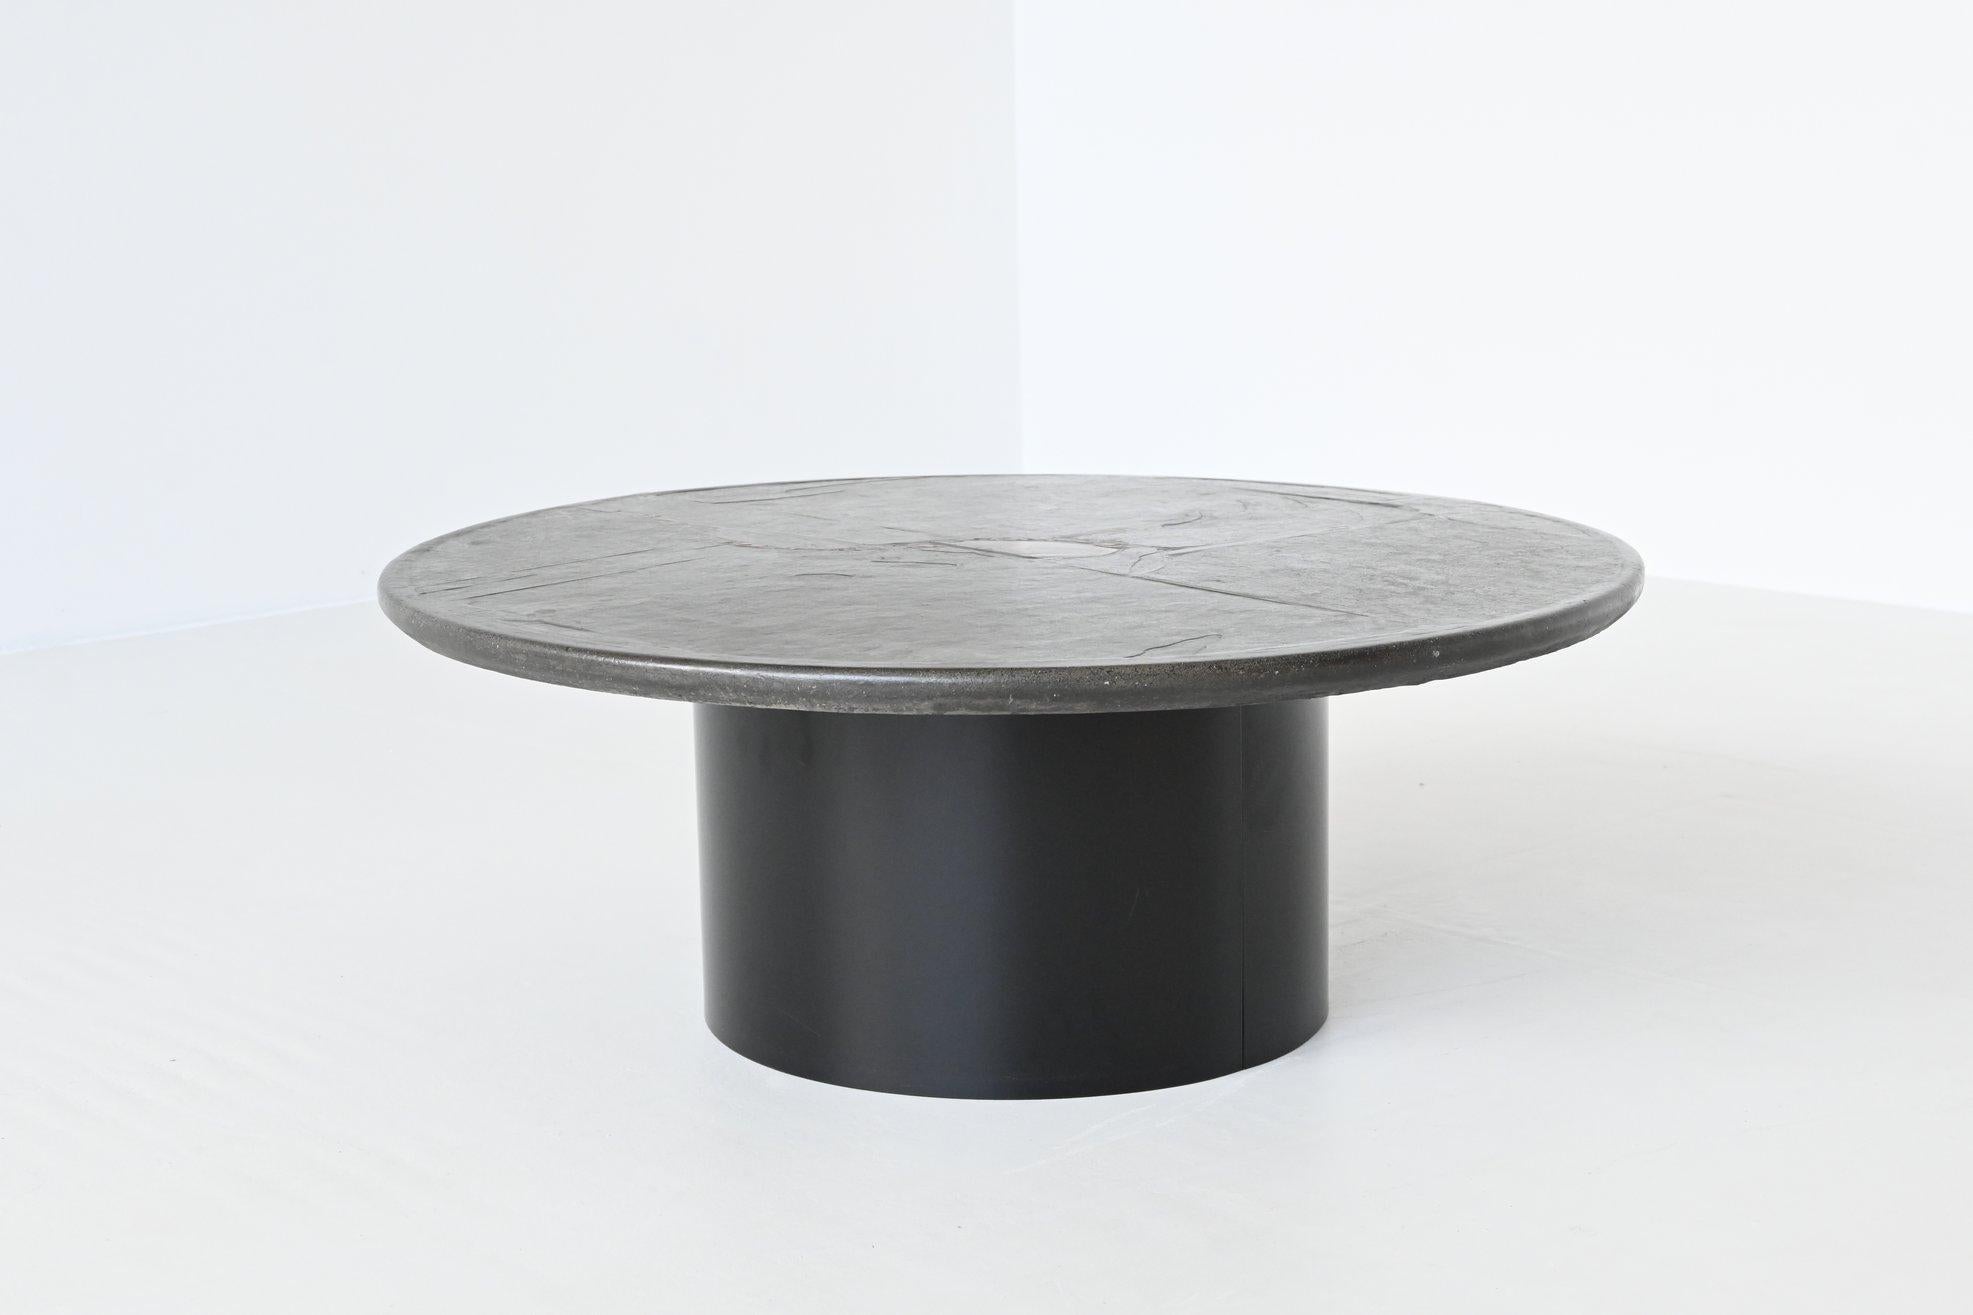 Beautiful round shaped coffee table designed and made by Paul Kingma, The Netherlands 1995. The dark colored heavy and thick concrete top rests on two metal C shaped bases that are black lacquered. Beautiful composition of slate, stones, copper and